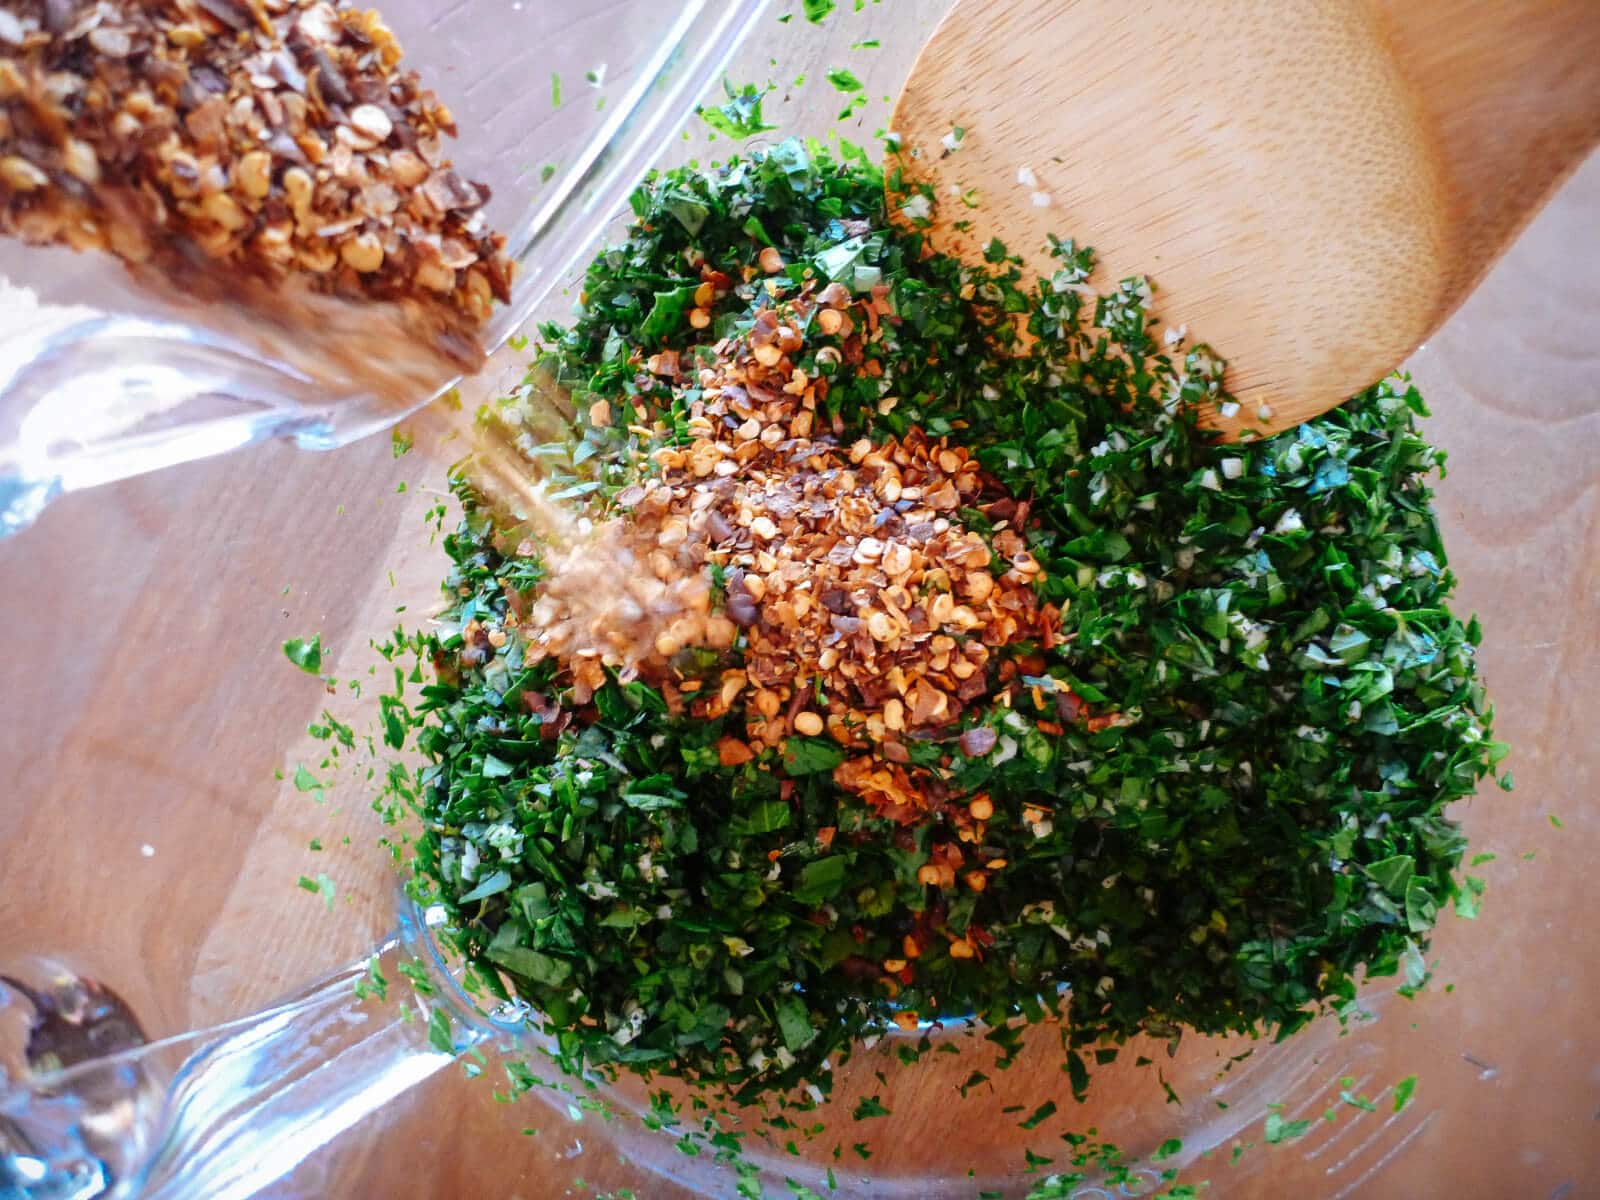 Combine all of the chimichurri ingredients in a bowl